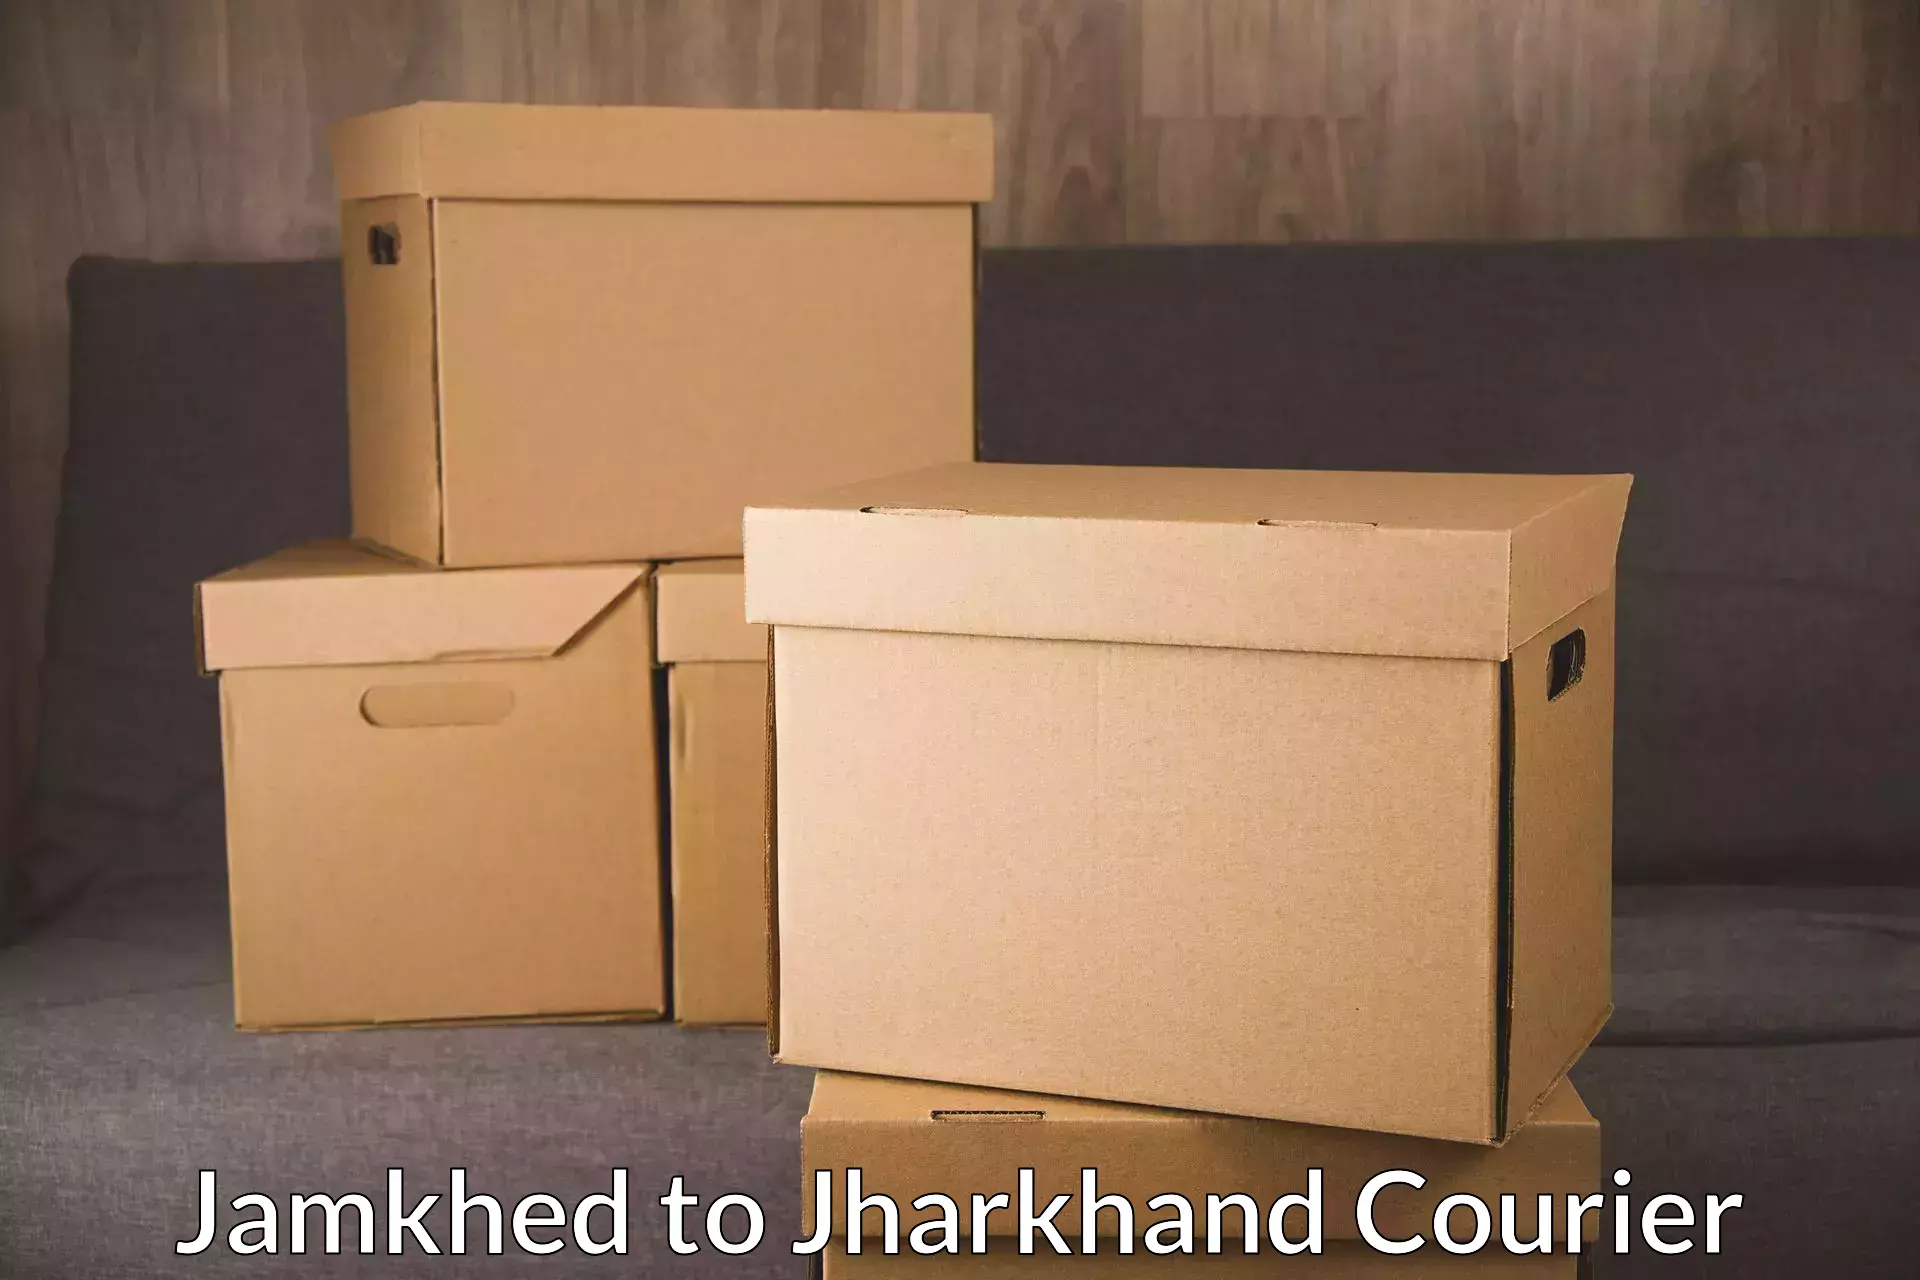 24/7 courier service Jamkhed to Jharkhand